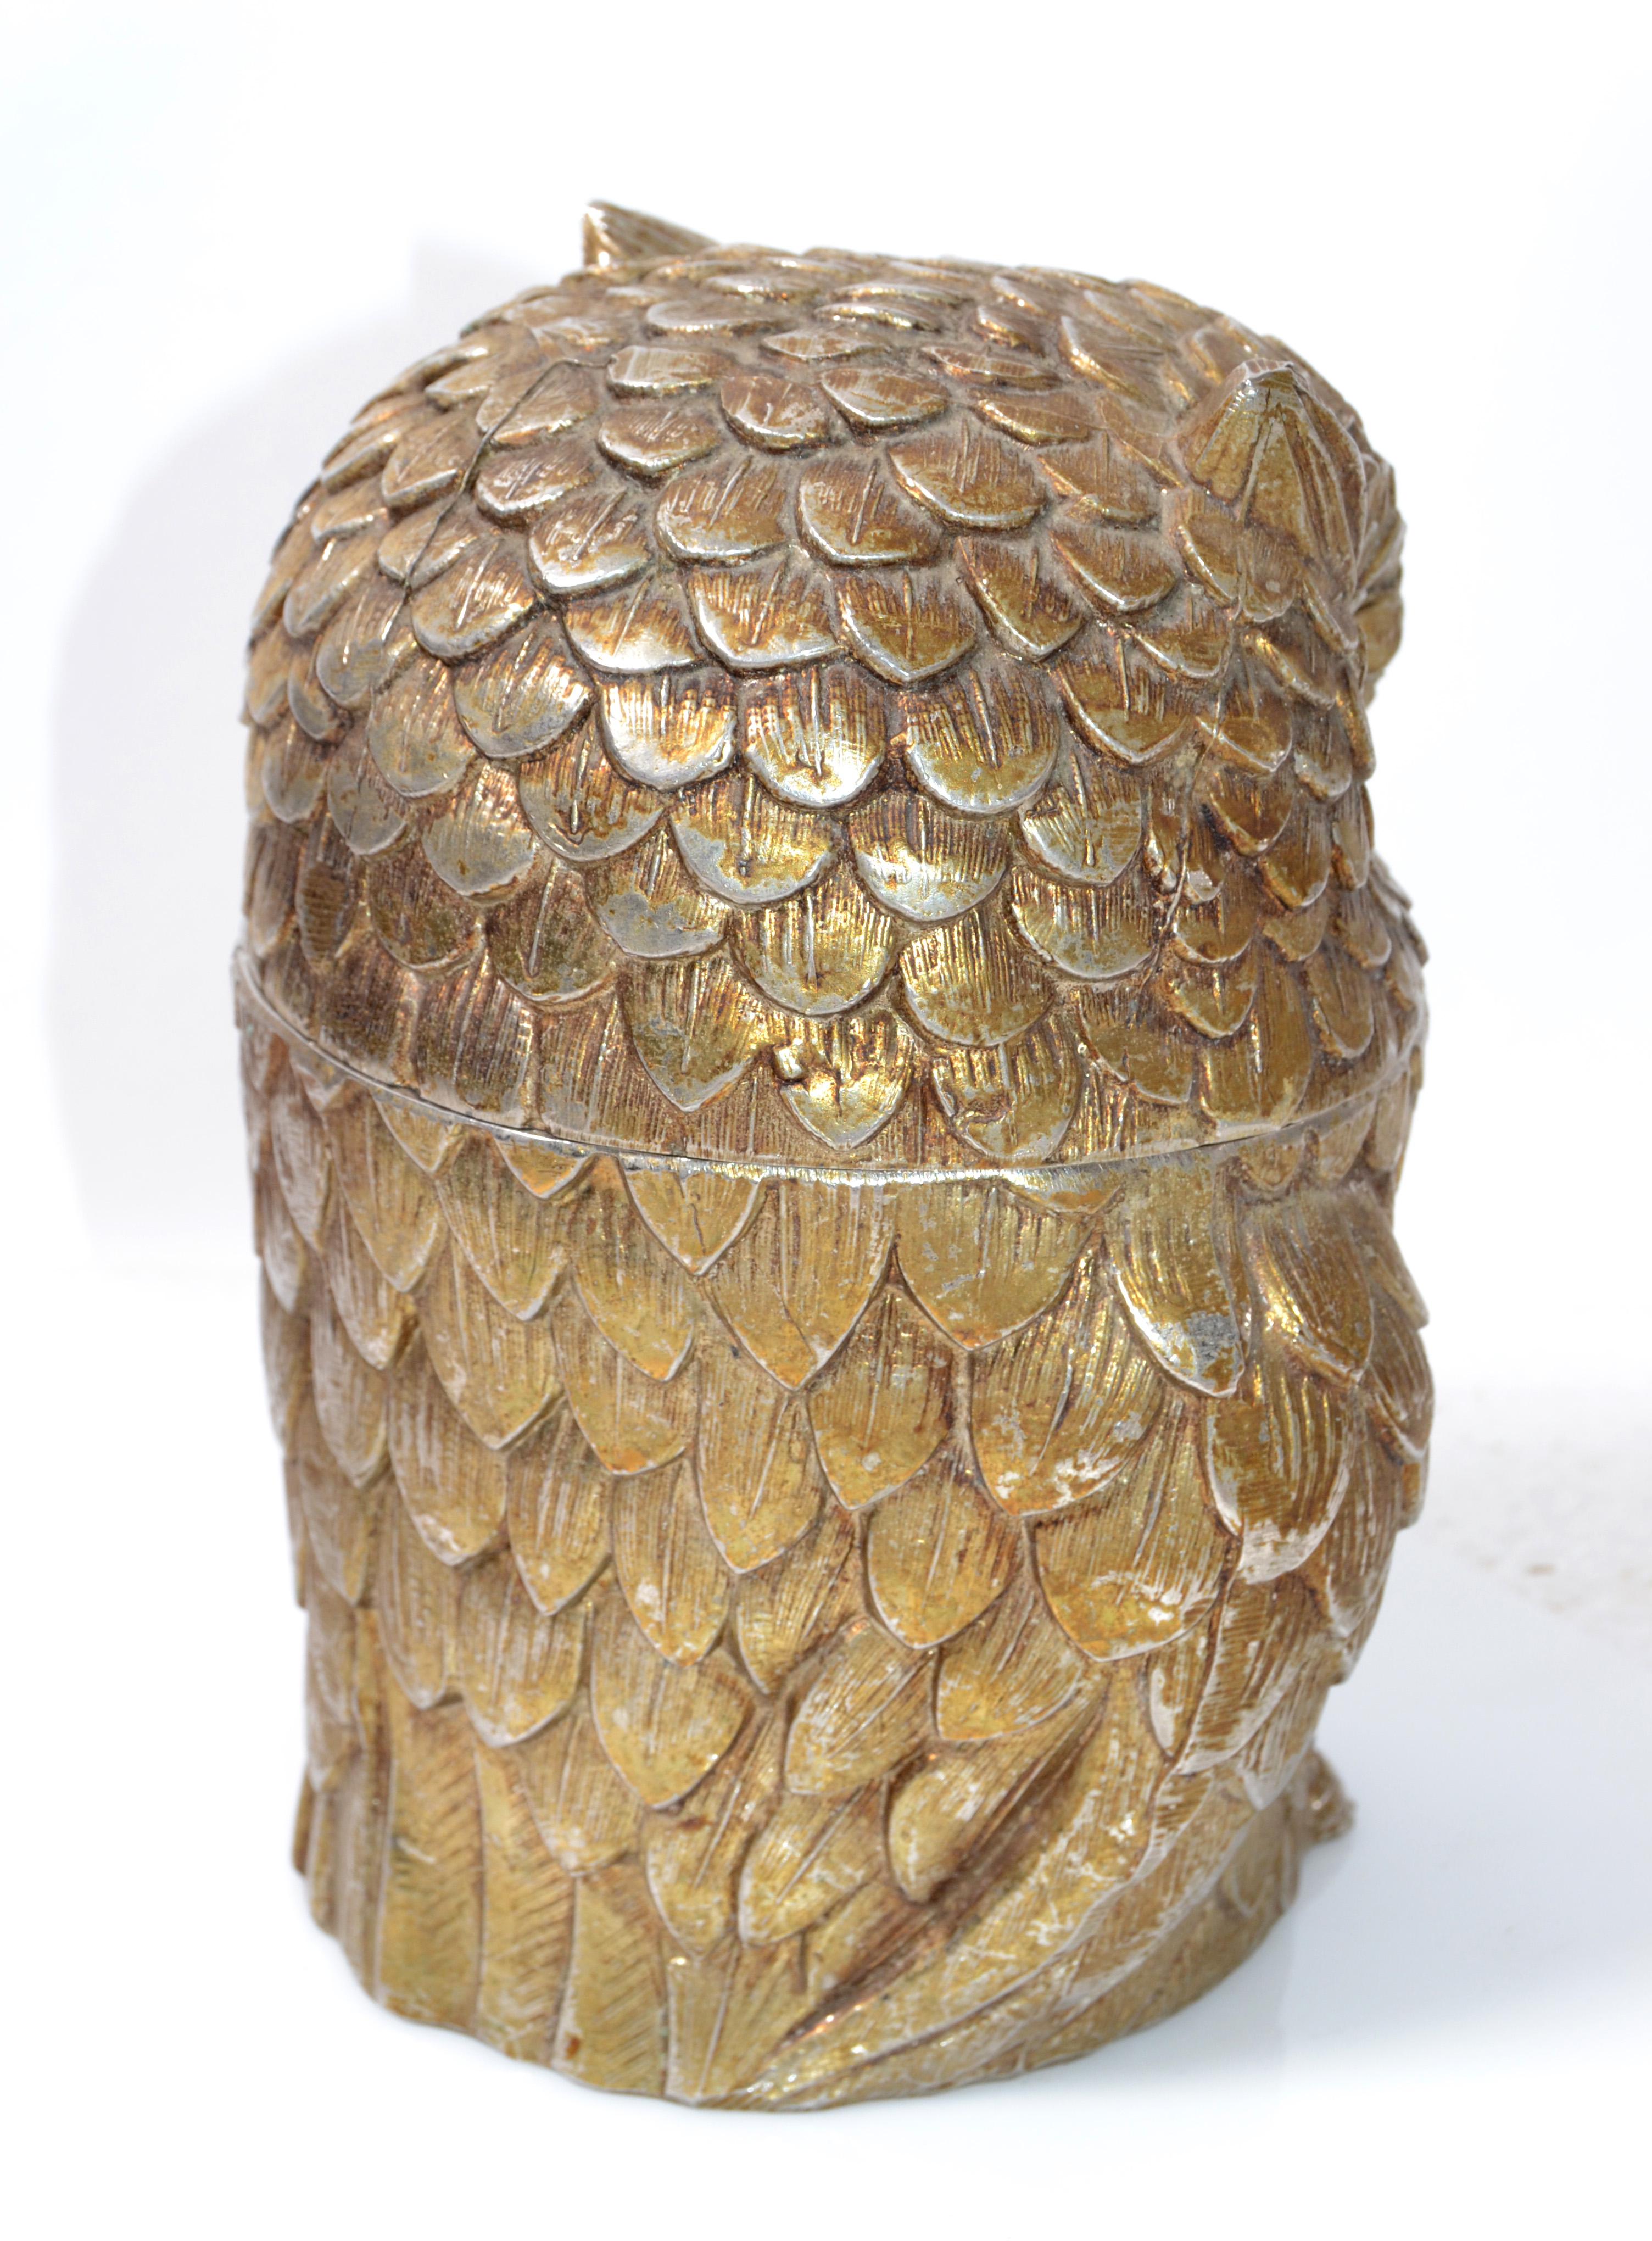 Owl Mauro Manetti Gold Plate & Insulated Ice Bucket Mid-Century Modern, Italy For Sale 4